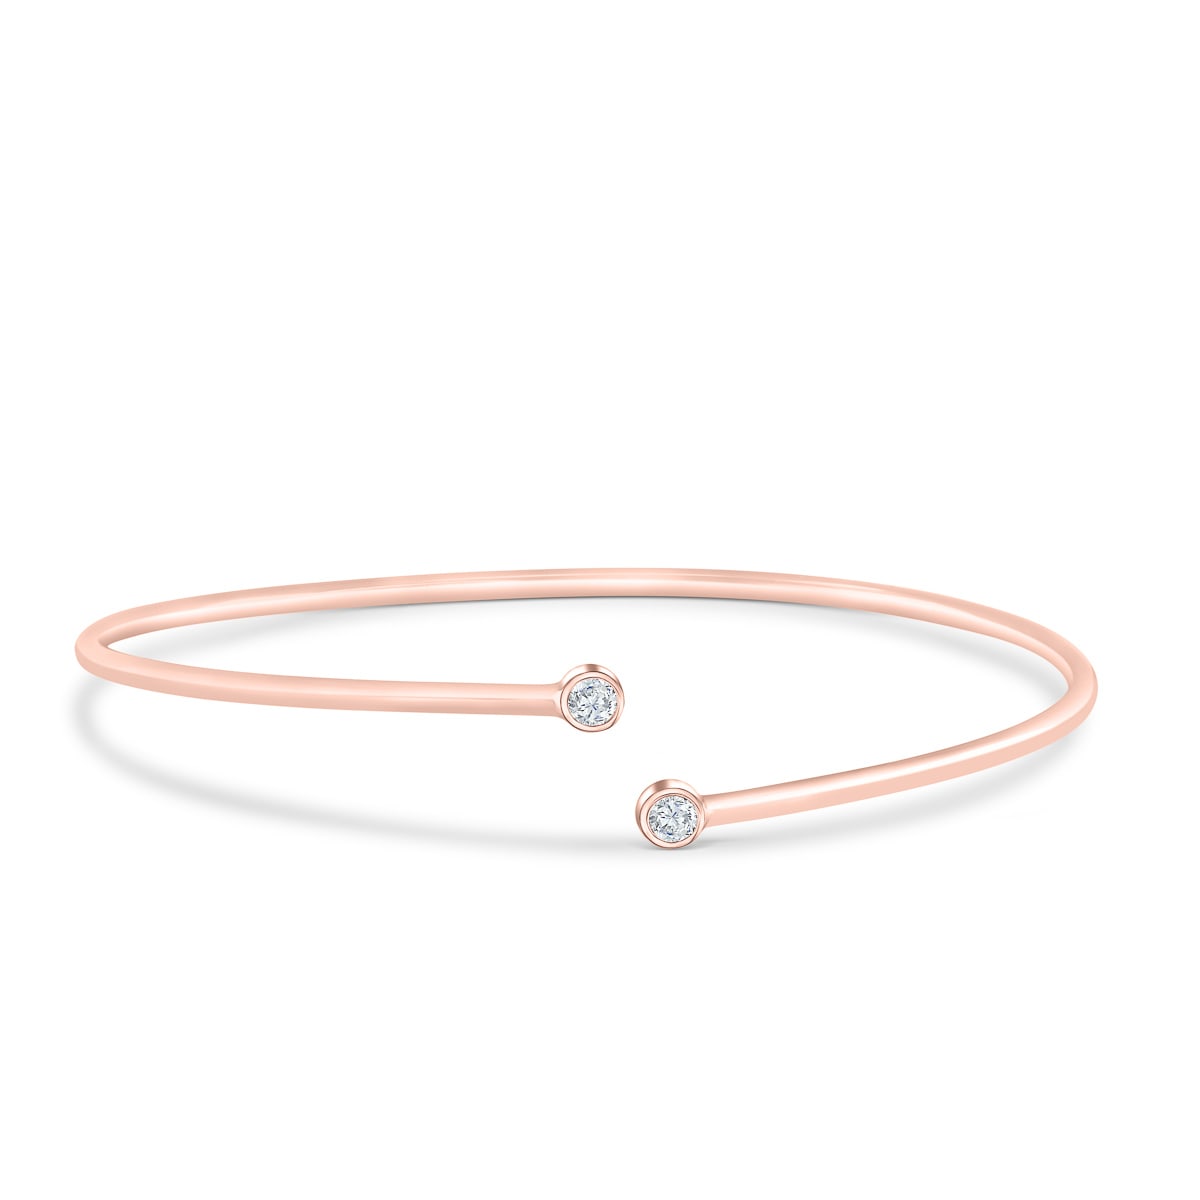 Single Row Adjustable Stud Bangle in Rose Gold - Modern Gents Trading Co.